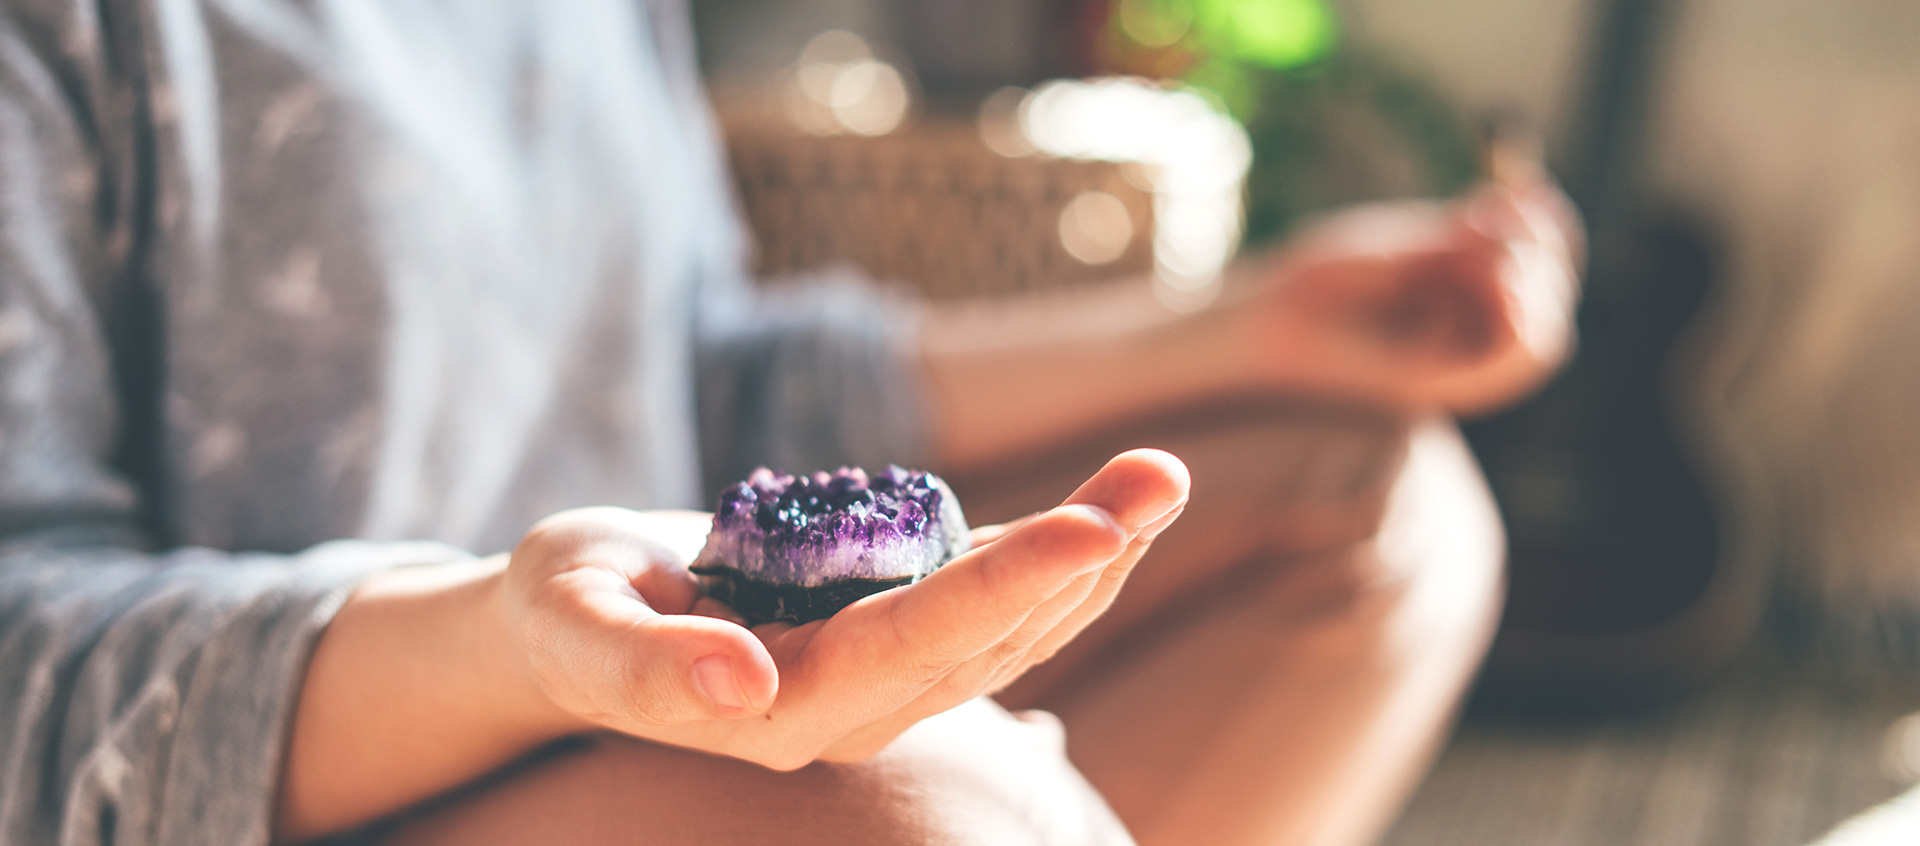 6 Ways to Clear Energy and Raise the Vibration in Your Home | Kripalu